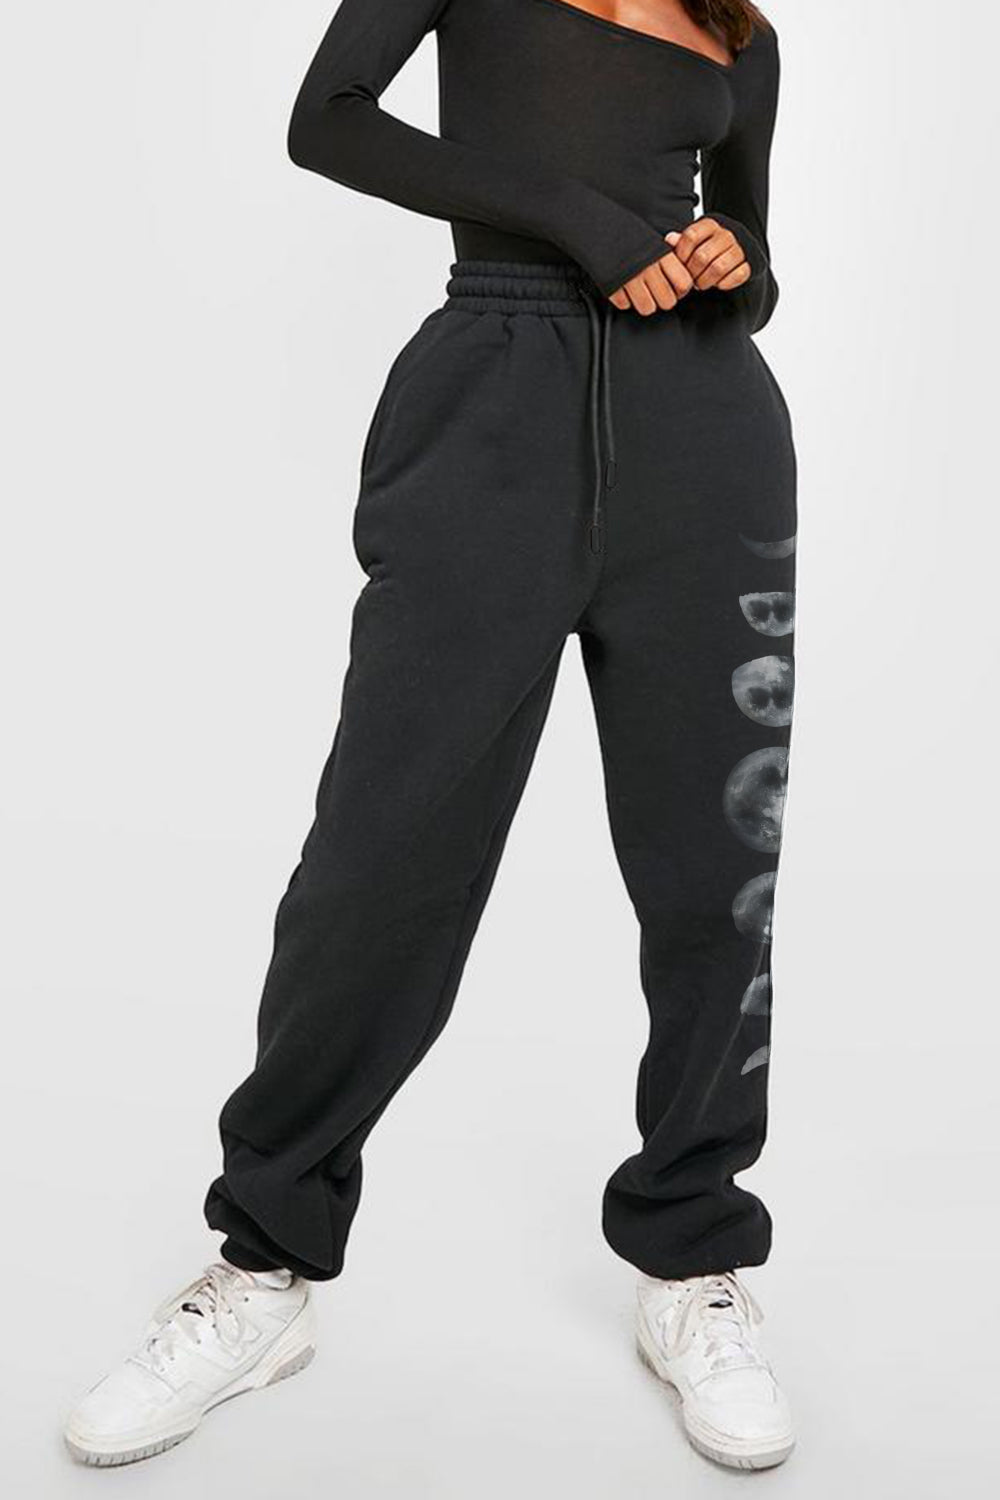 Trendsi Simply Love Full Size Lunar Phase Graphic Sweatpants